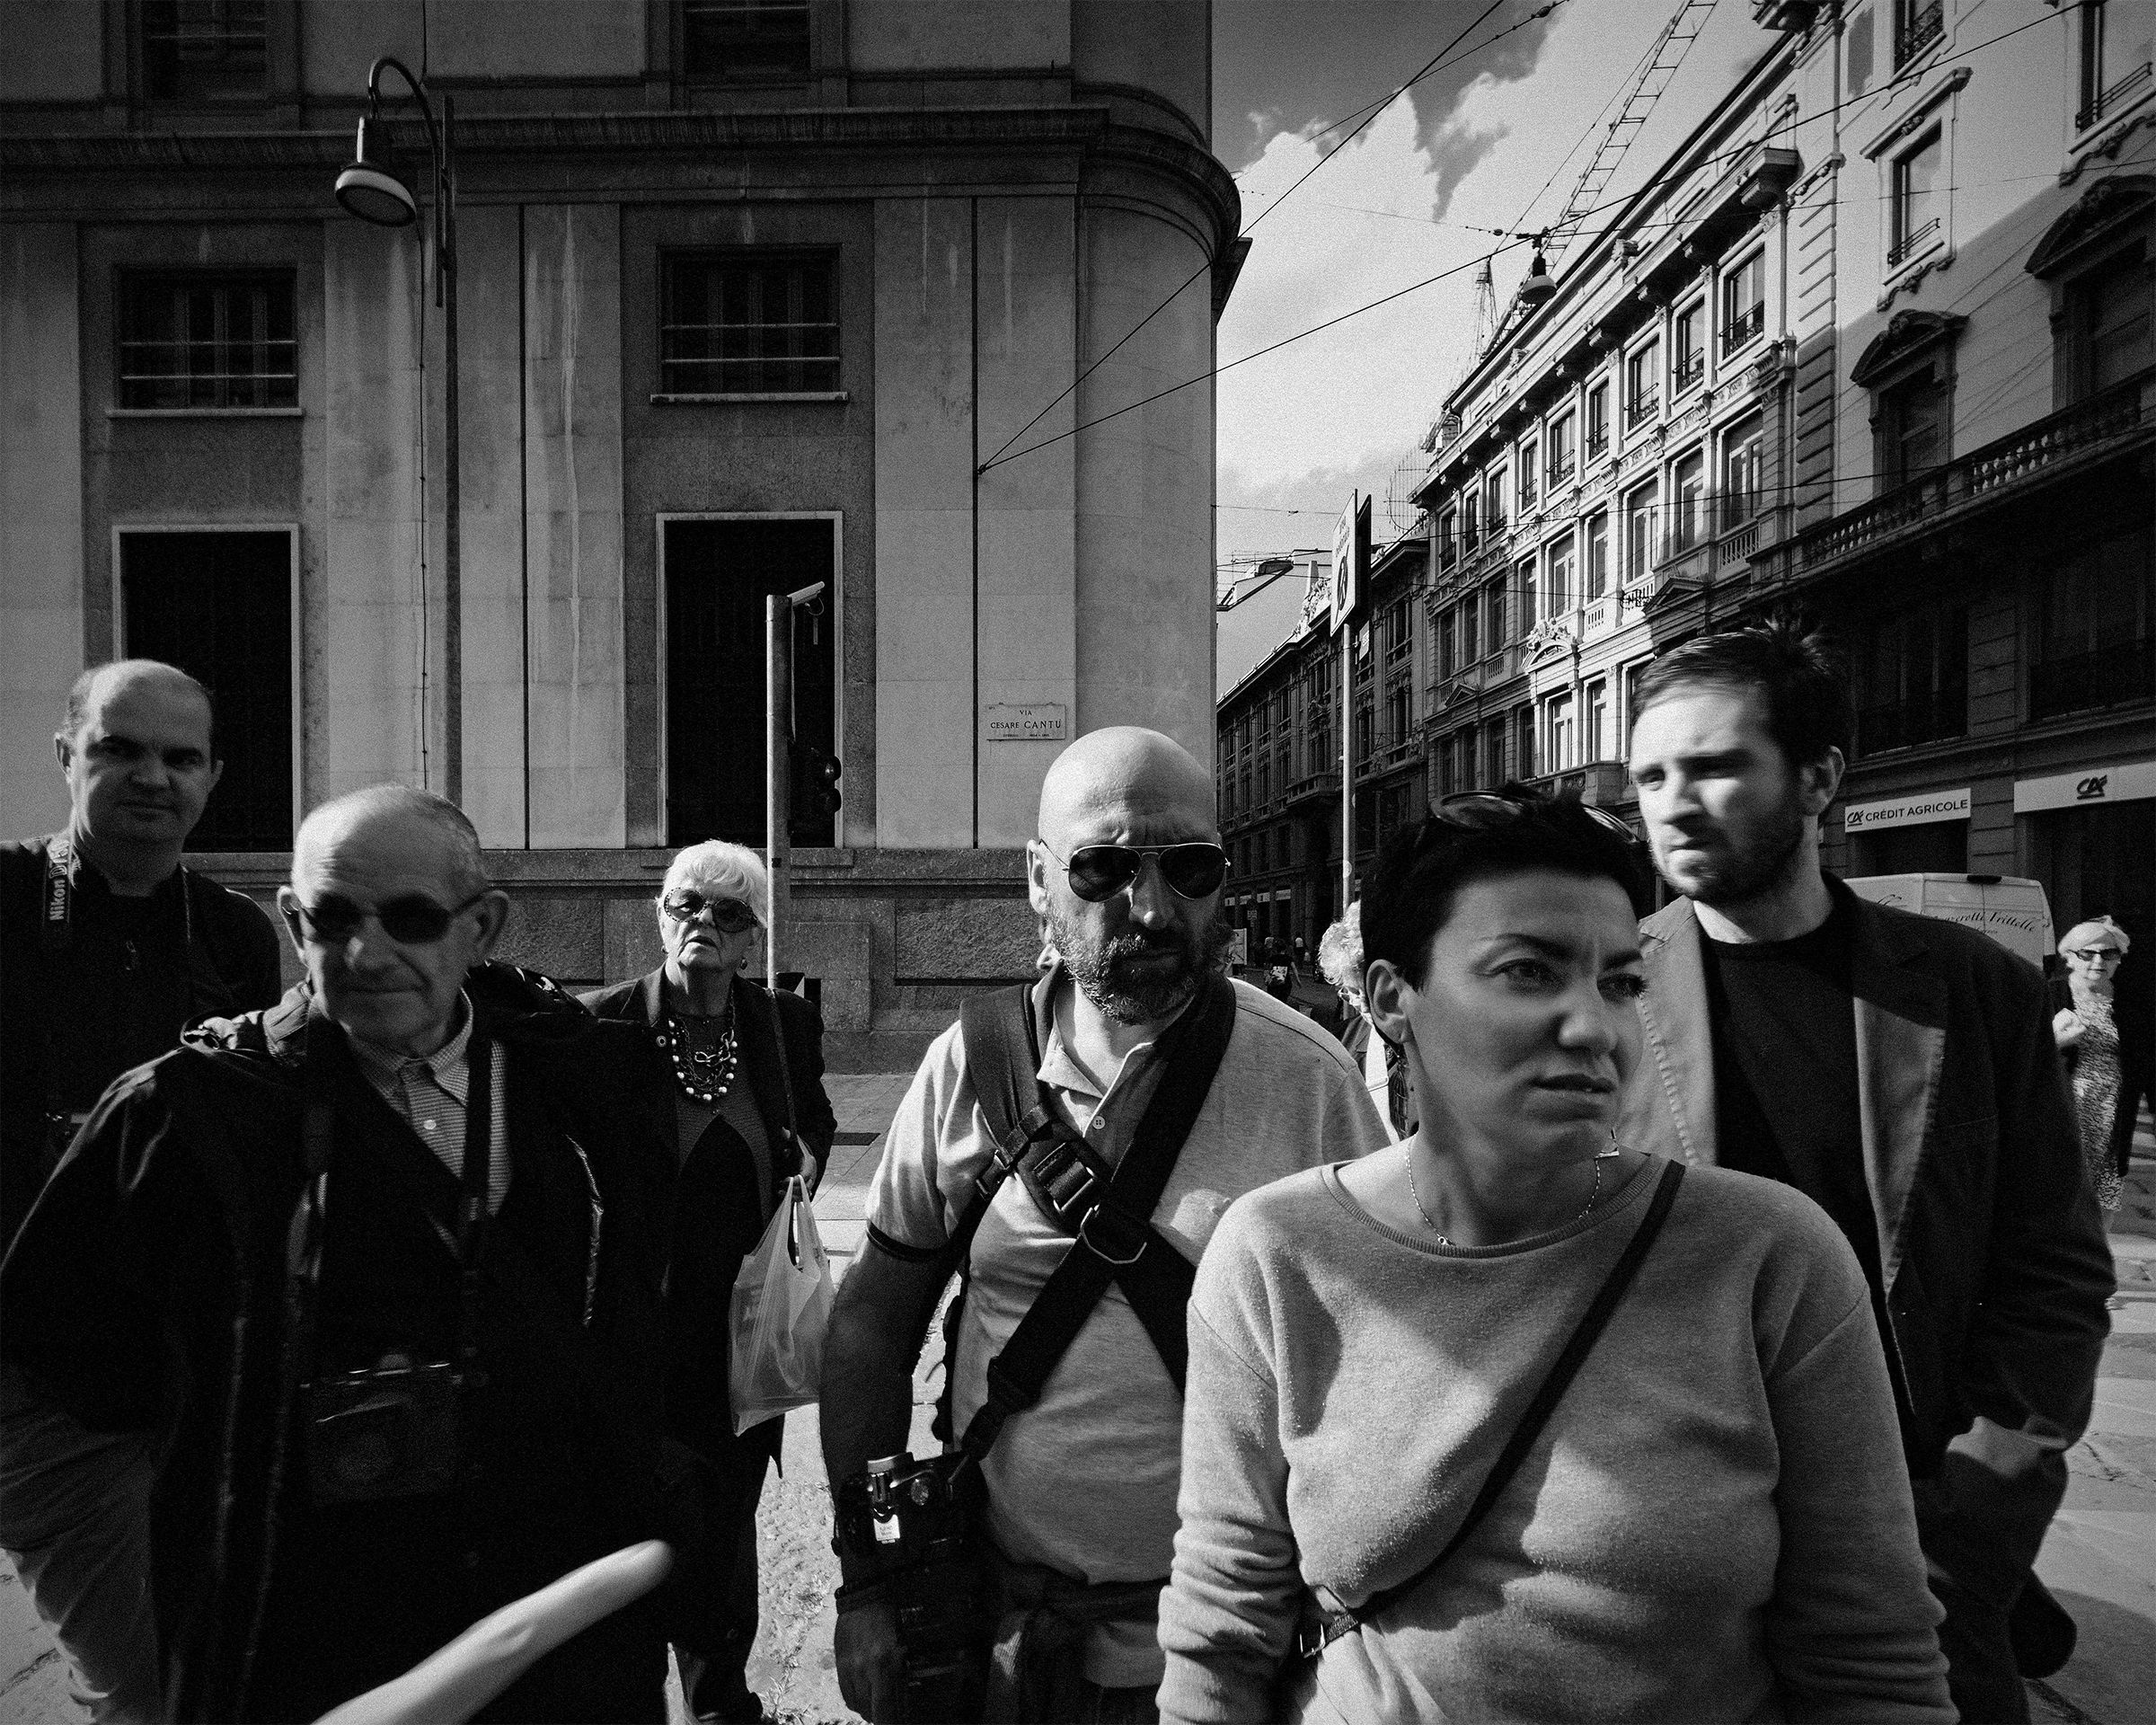 A Band of Photographers roaming in Milan...